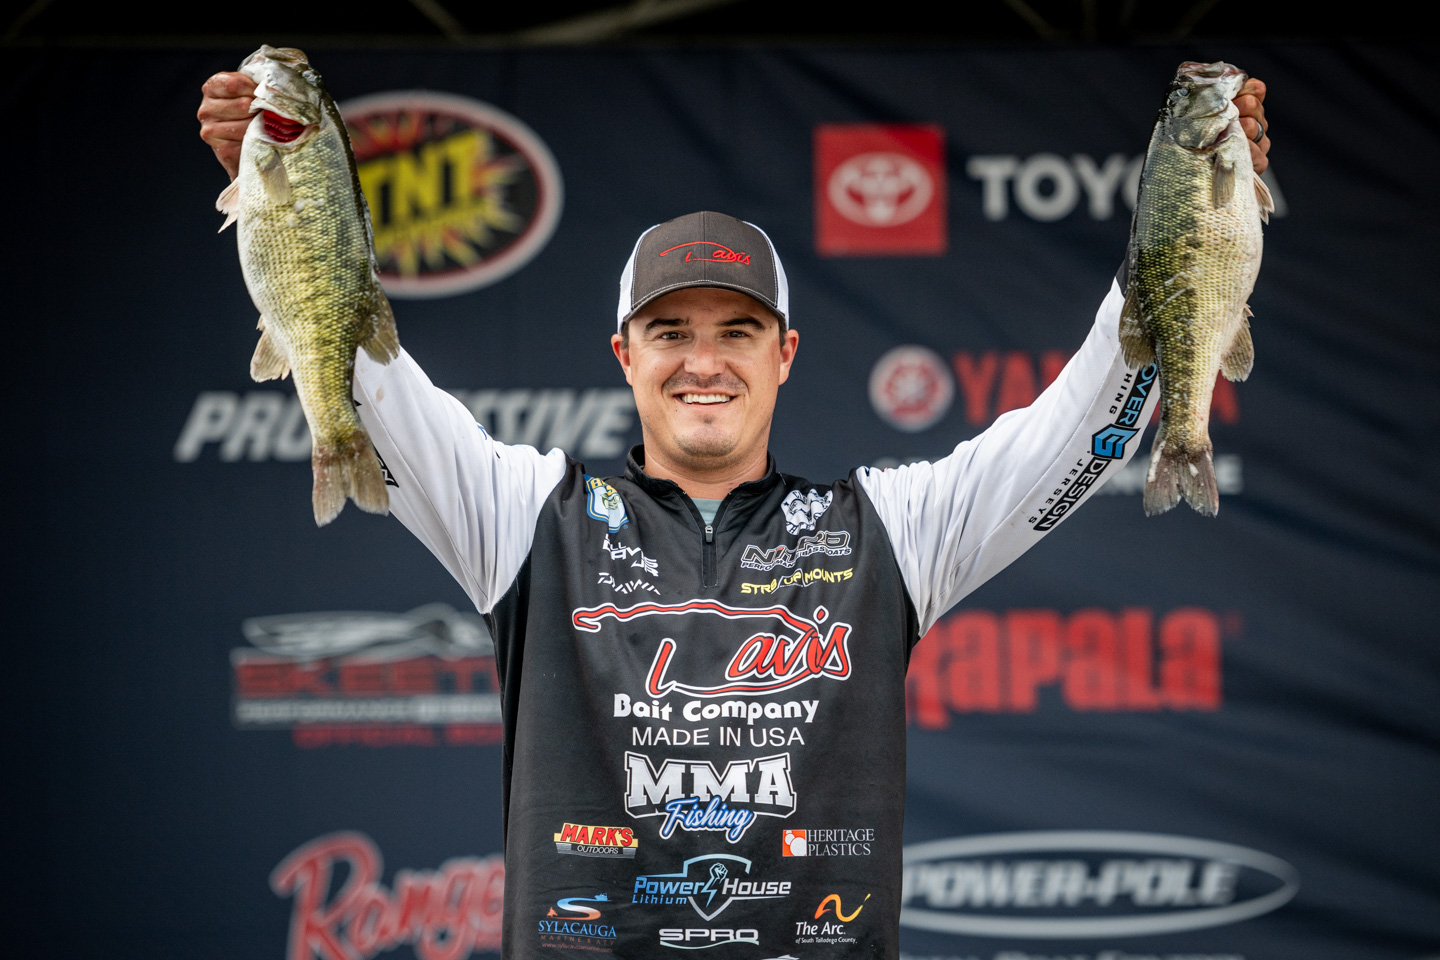 Hooks and hoops: Fishing great Jimmy Houston to conduct fishing